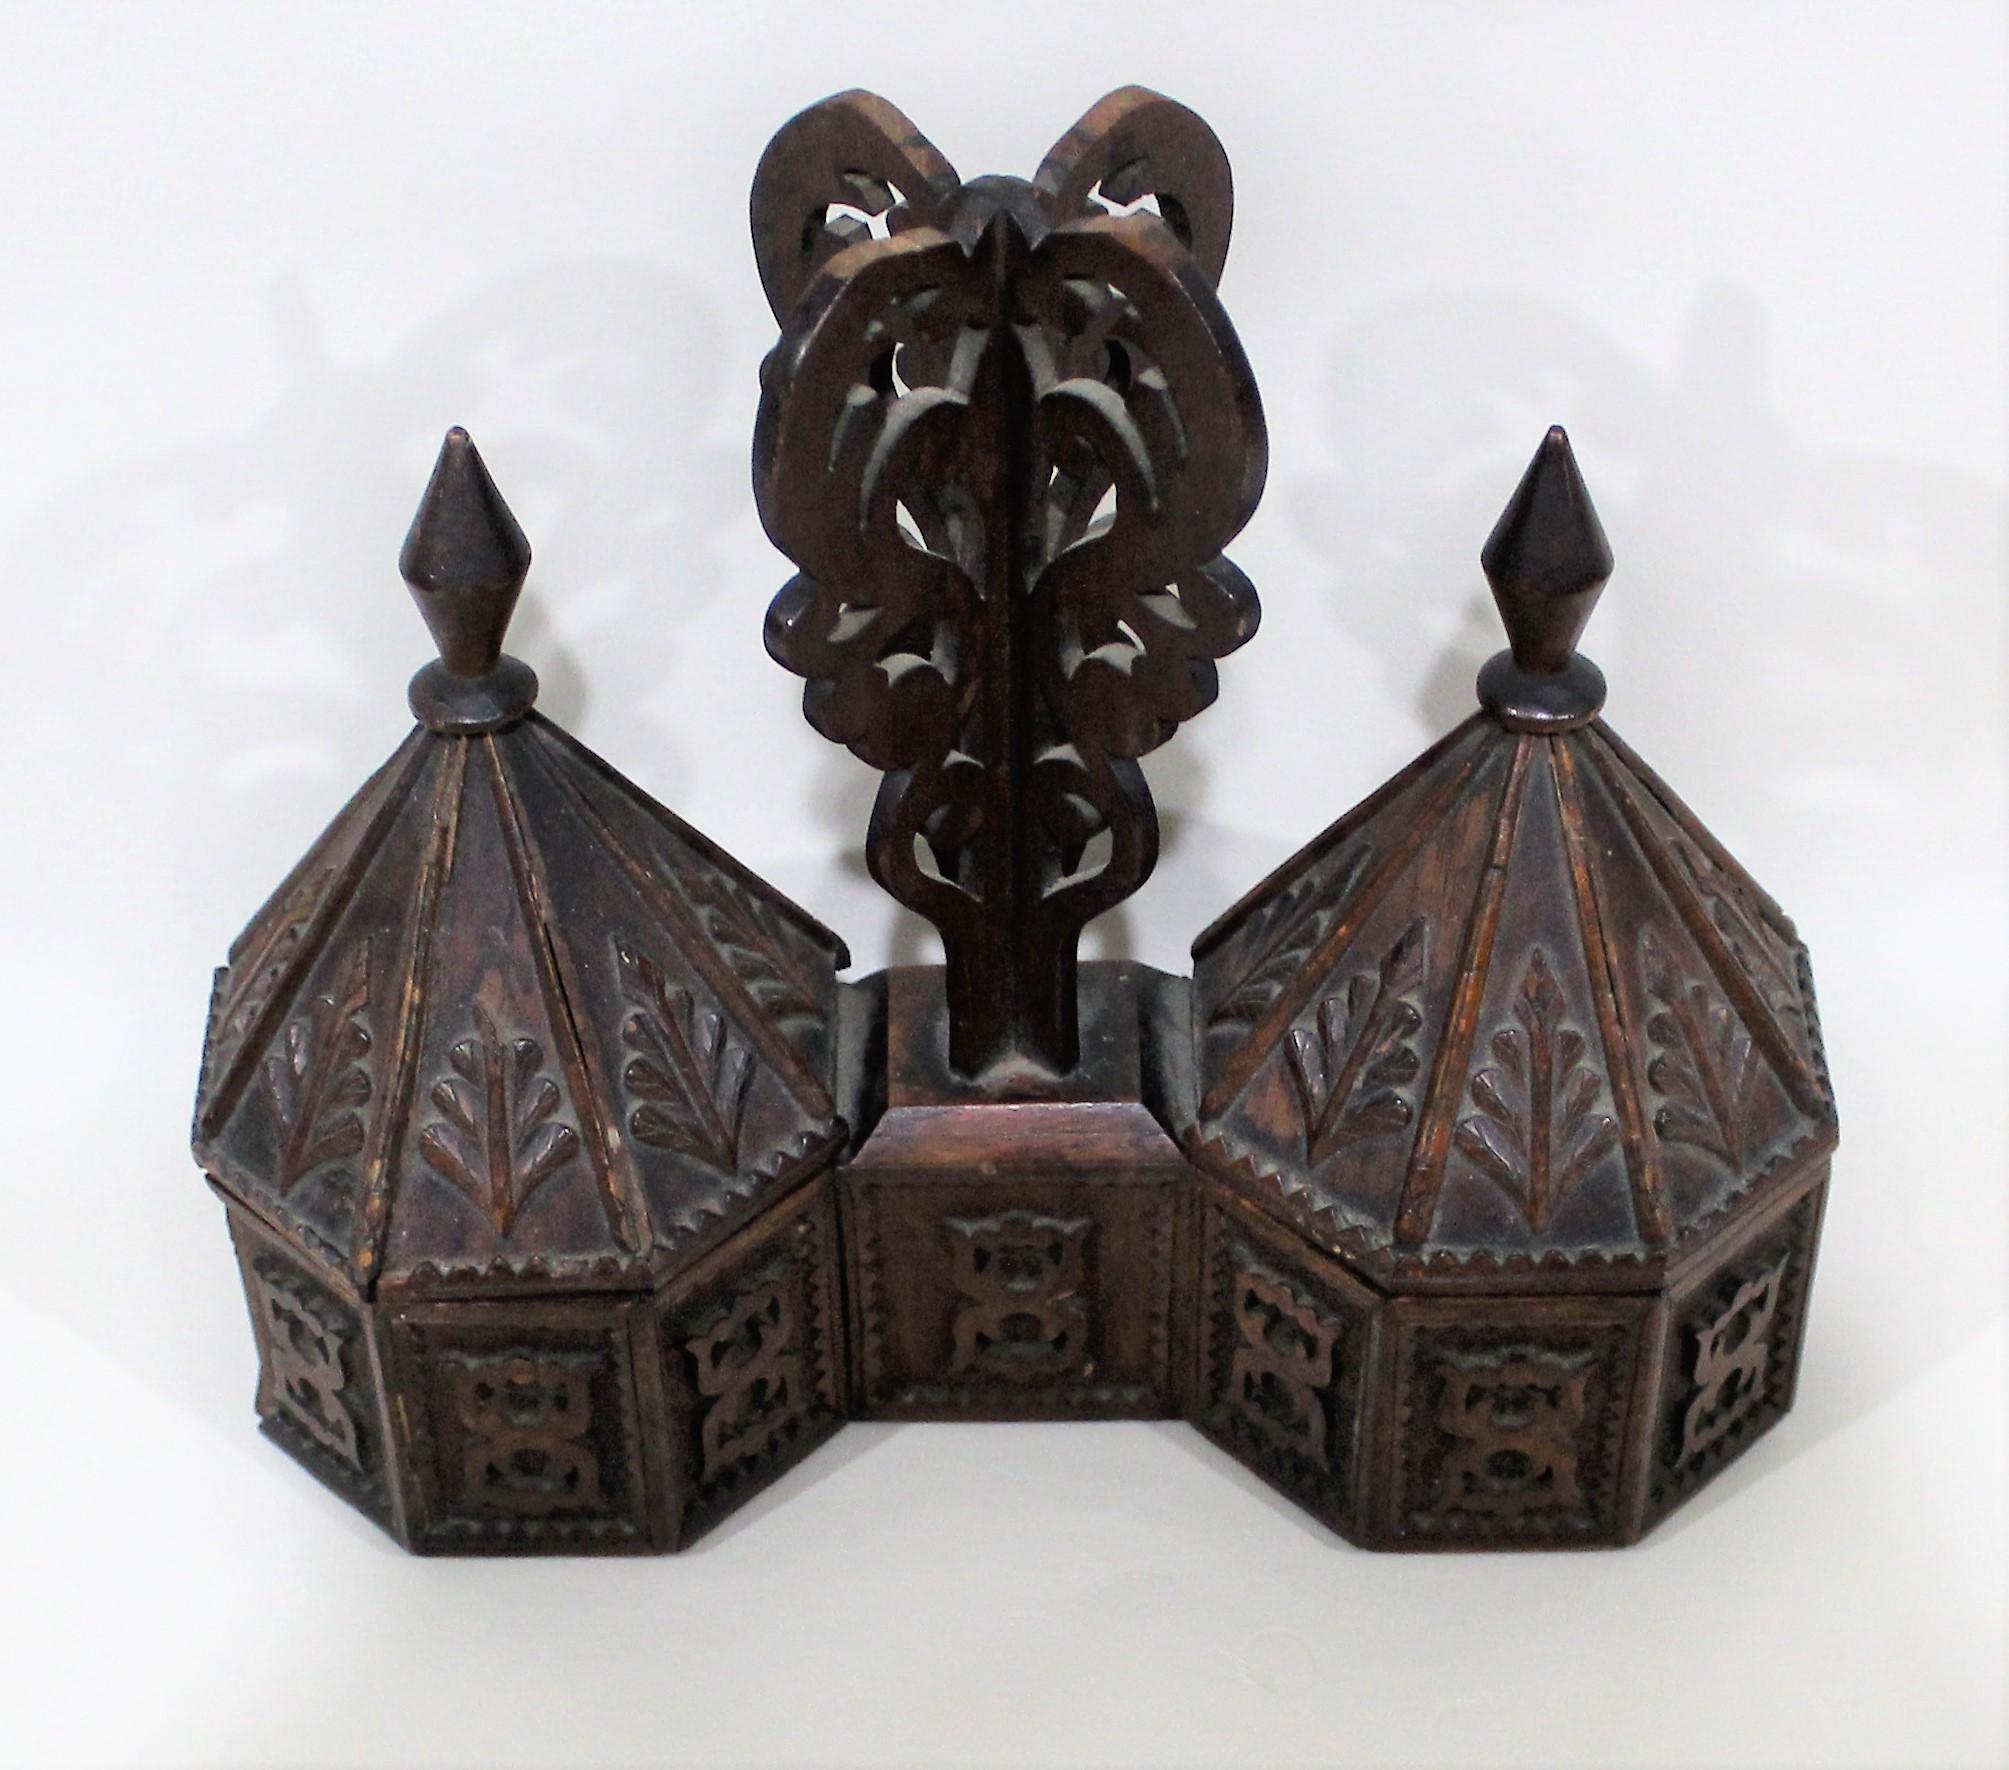 19th century finely carved double lidded Moorish style wood box.